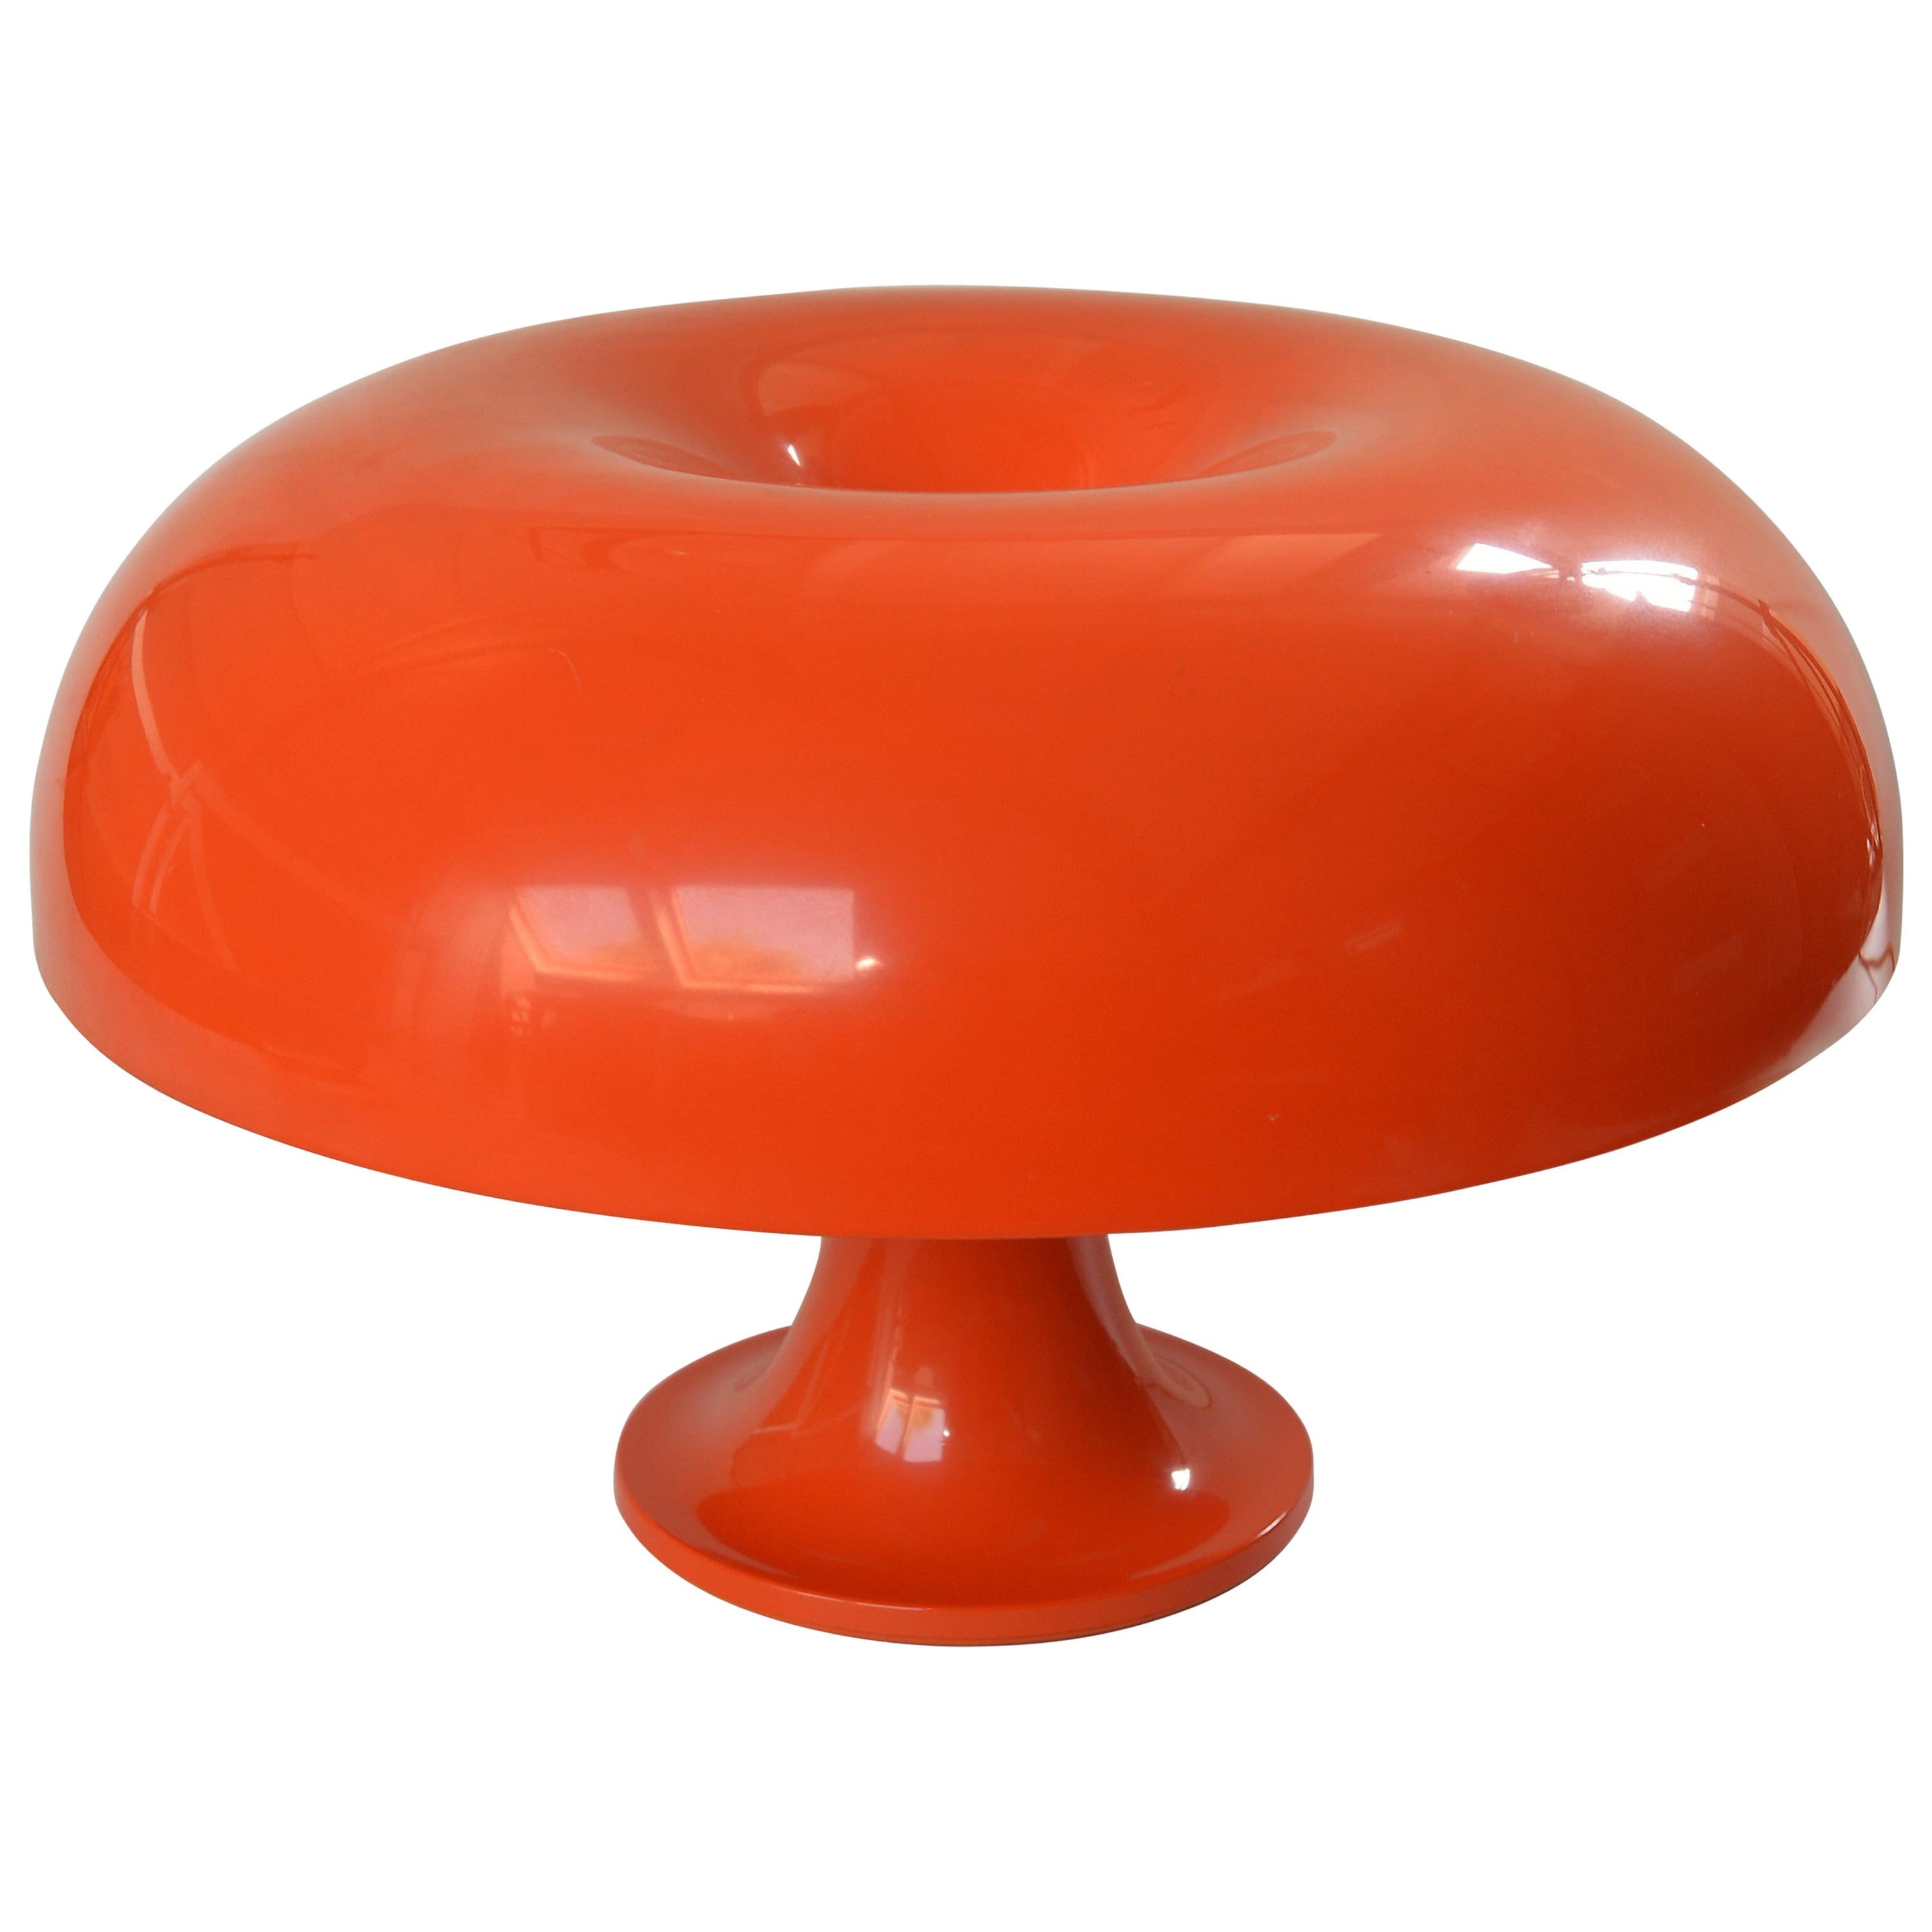 Vintage Nesso Table Lamp by Giancarlo Mattioli for Artemide, 1960s